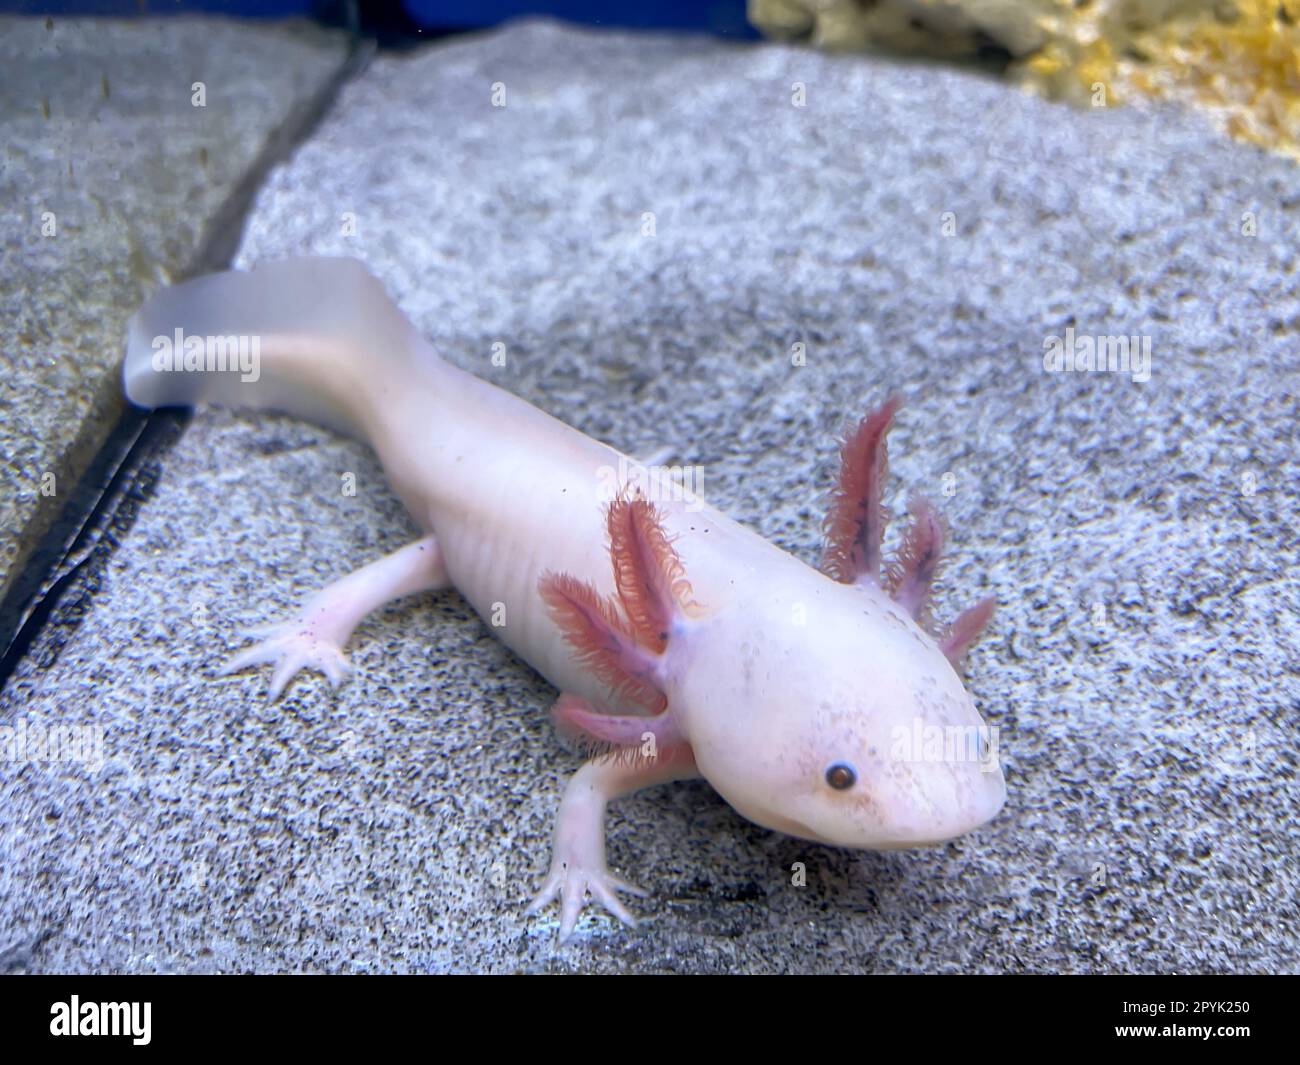 An axolotl in the aquarium. The axolotl is an aquatic Mexican caudate from the cross-toothed newt family. Stock Photo